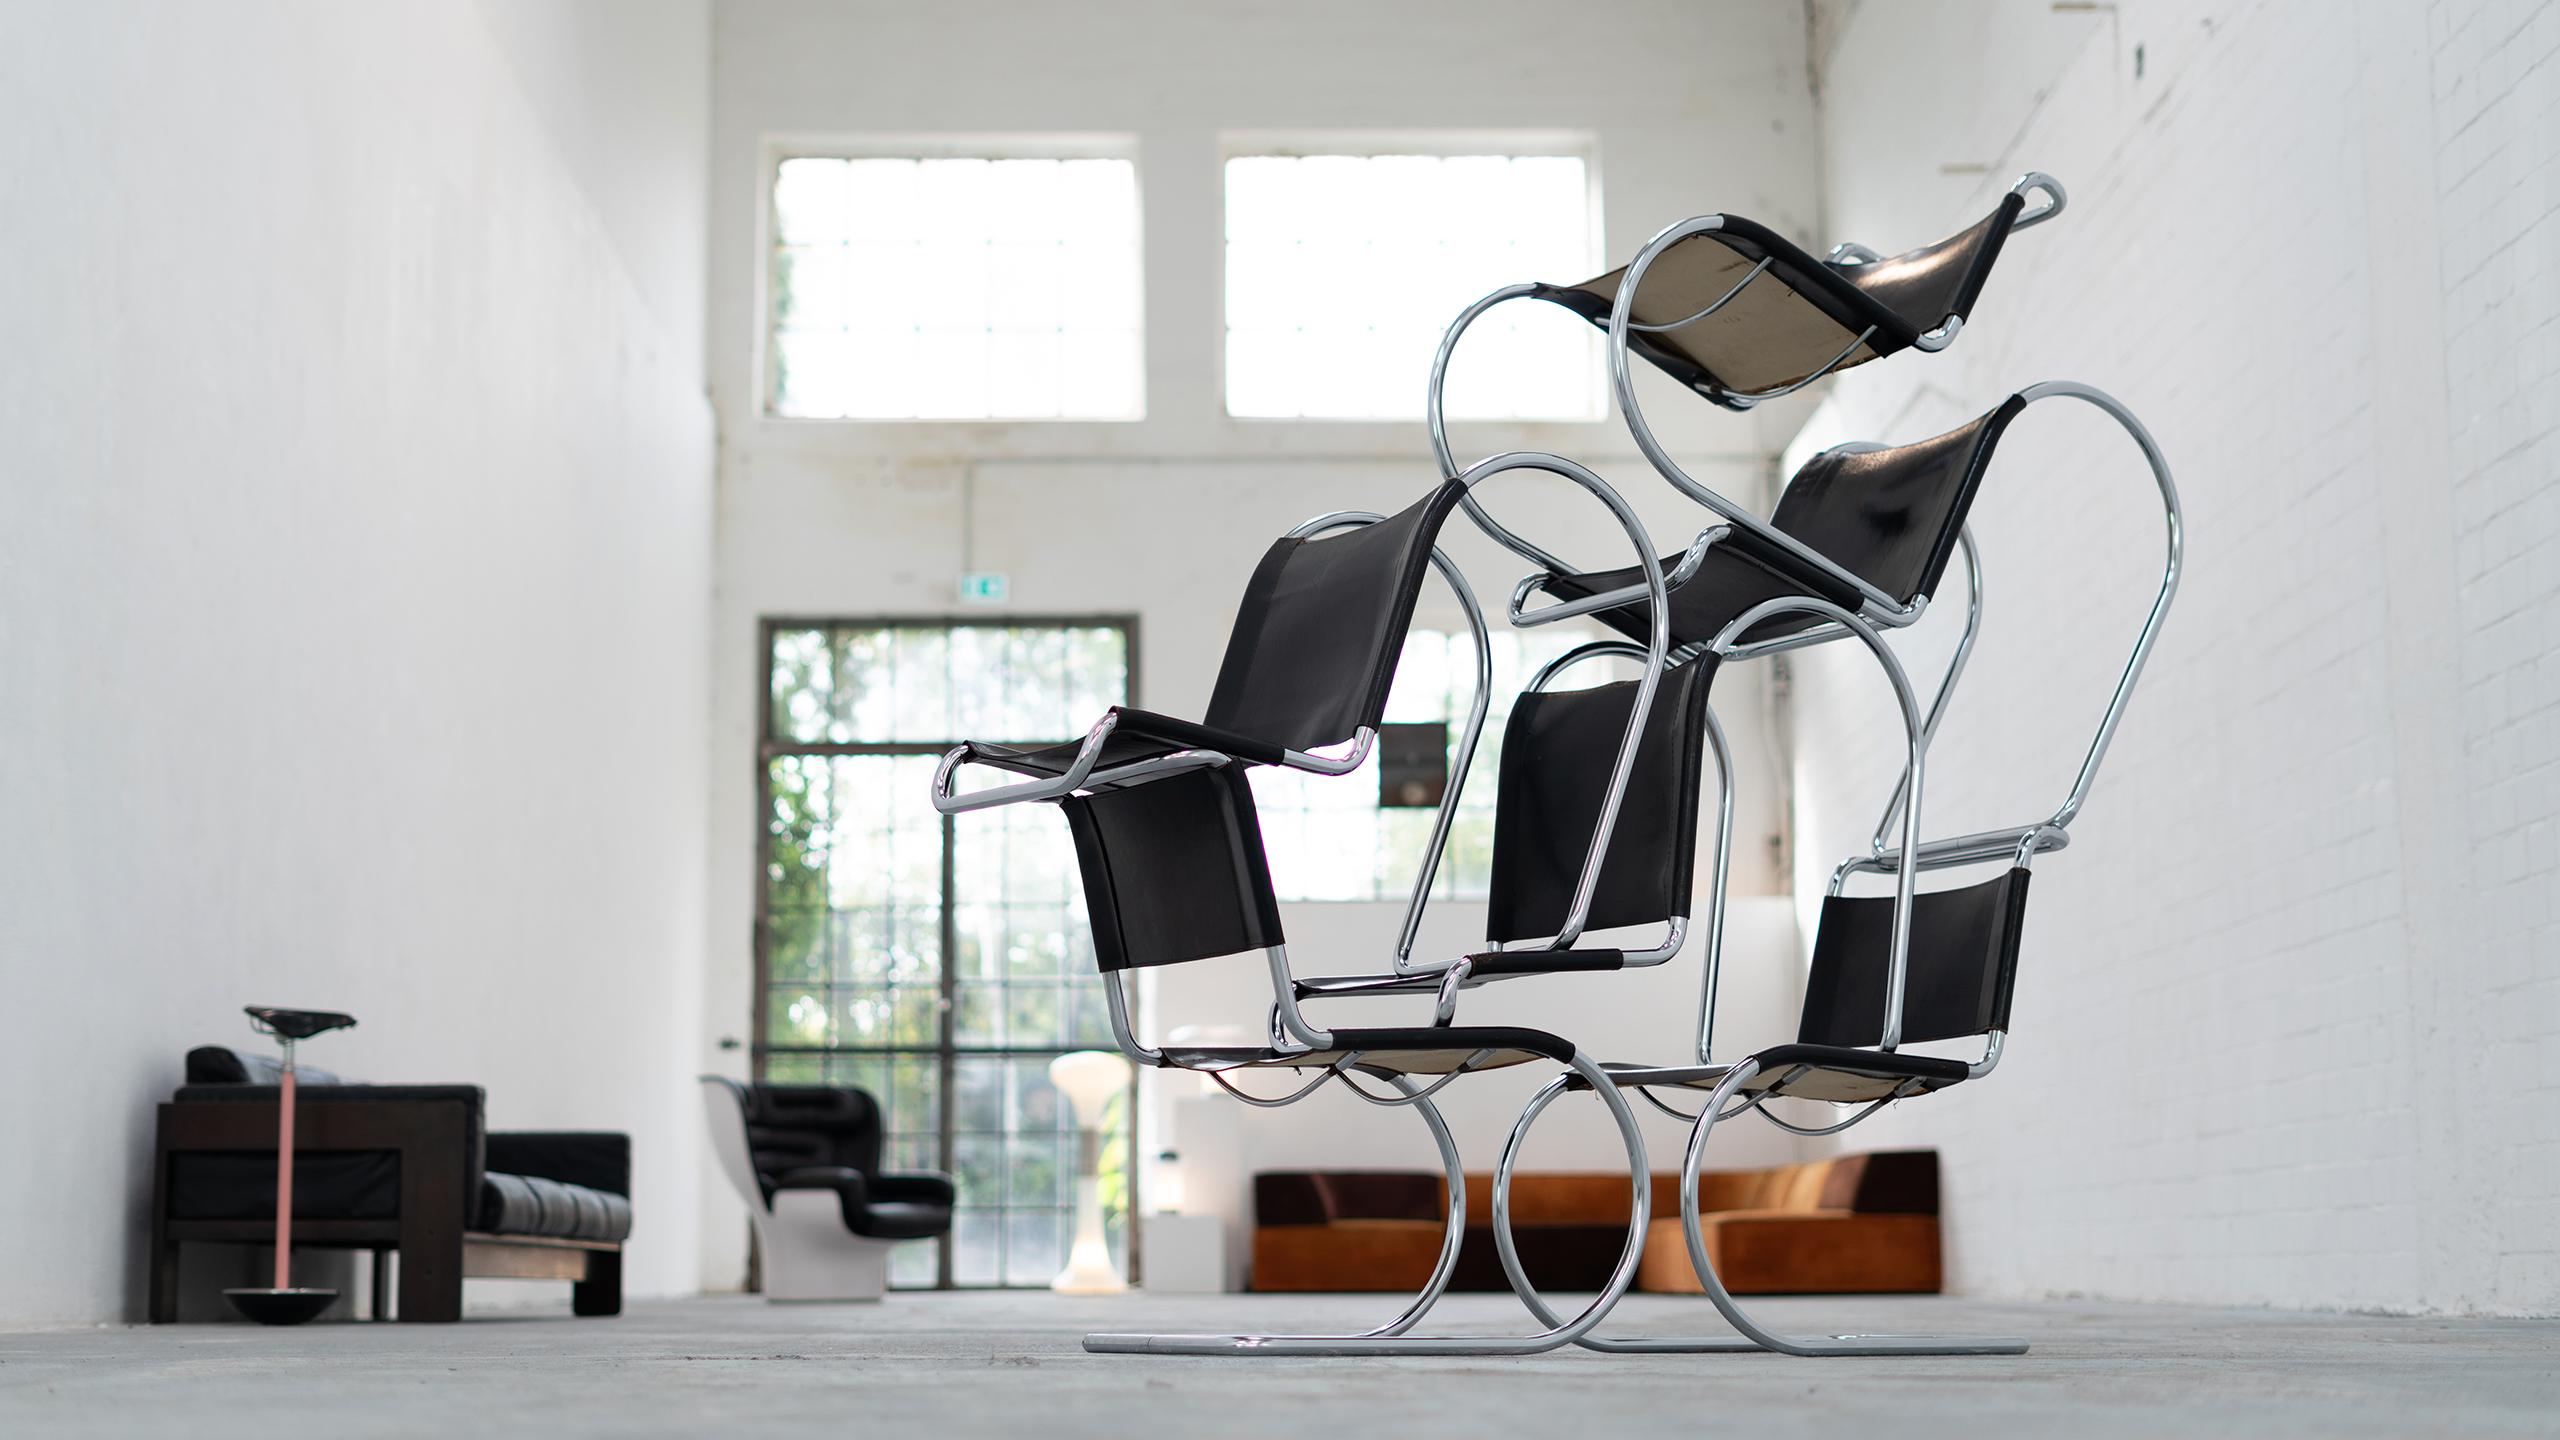 Bauhaus Ludwig Mies van der Rohe, MR10 Cantilever Chair, Black Leather for Thonet, 1927